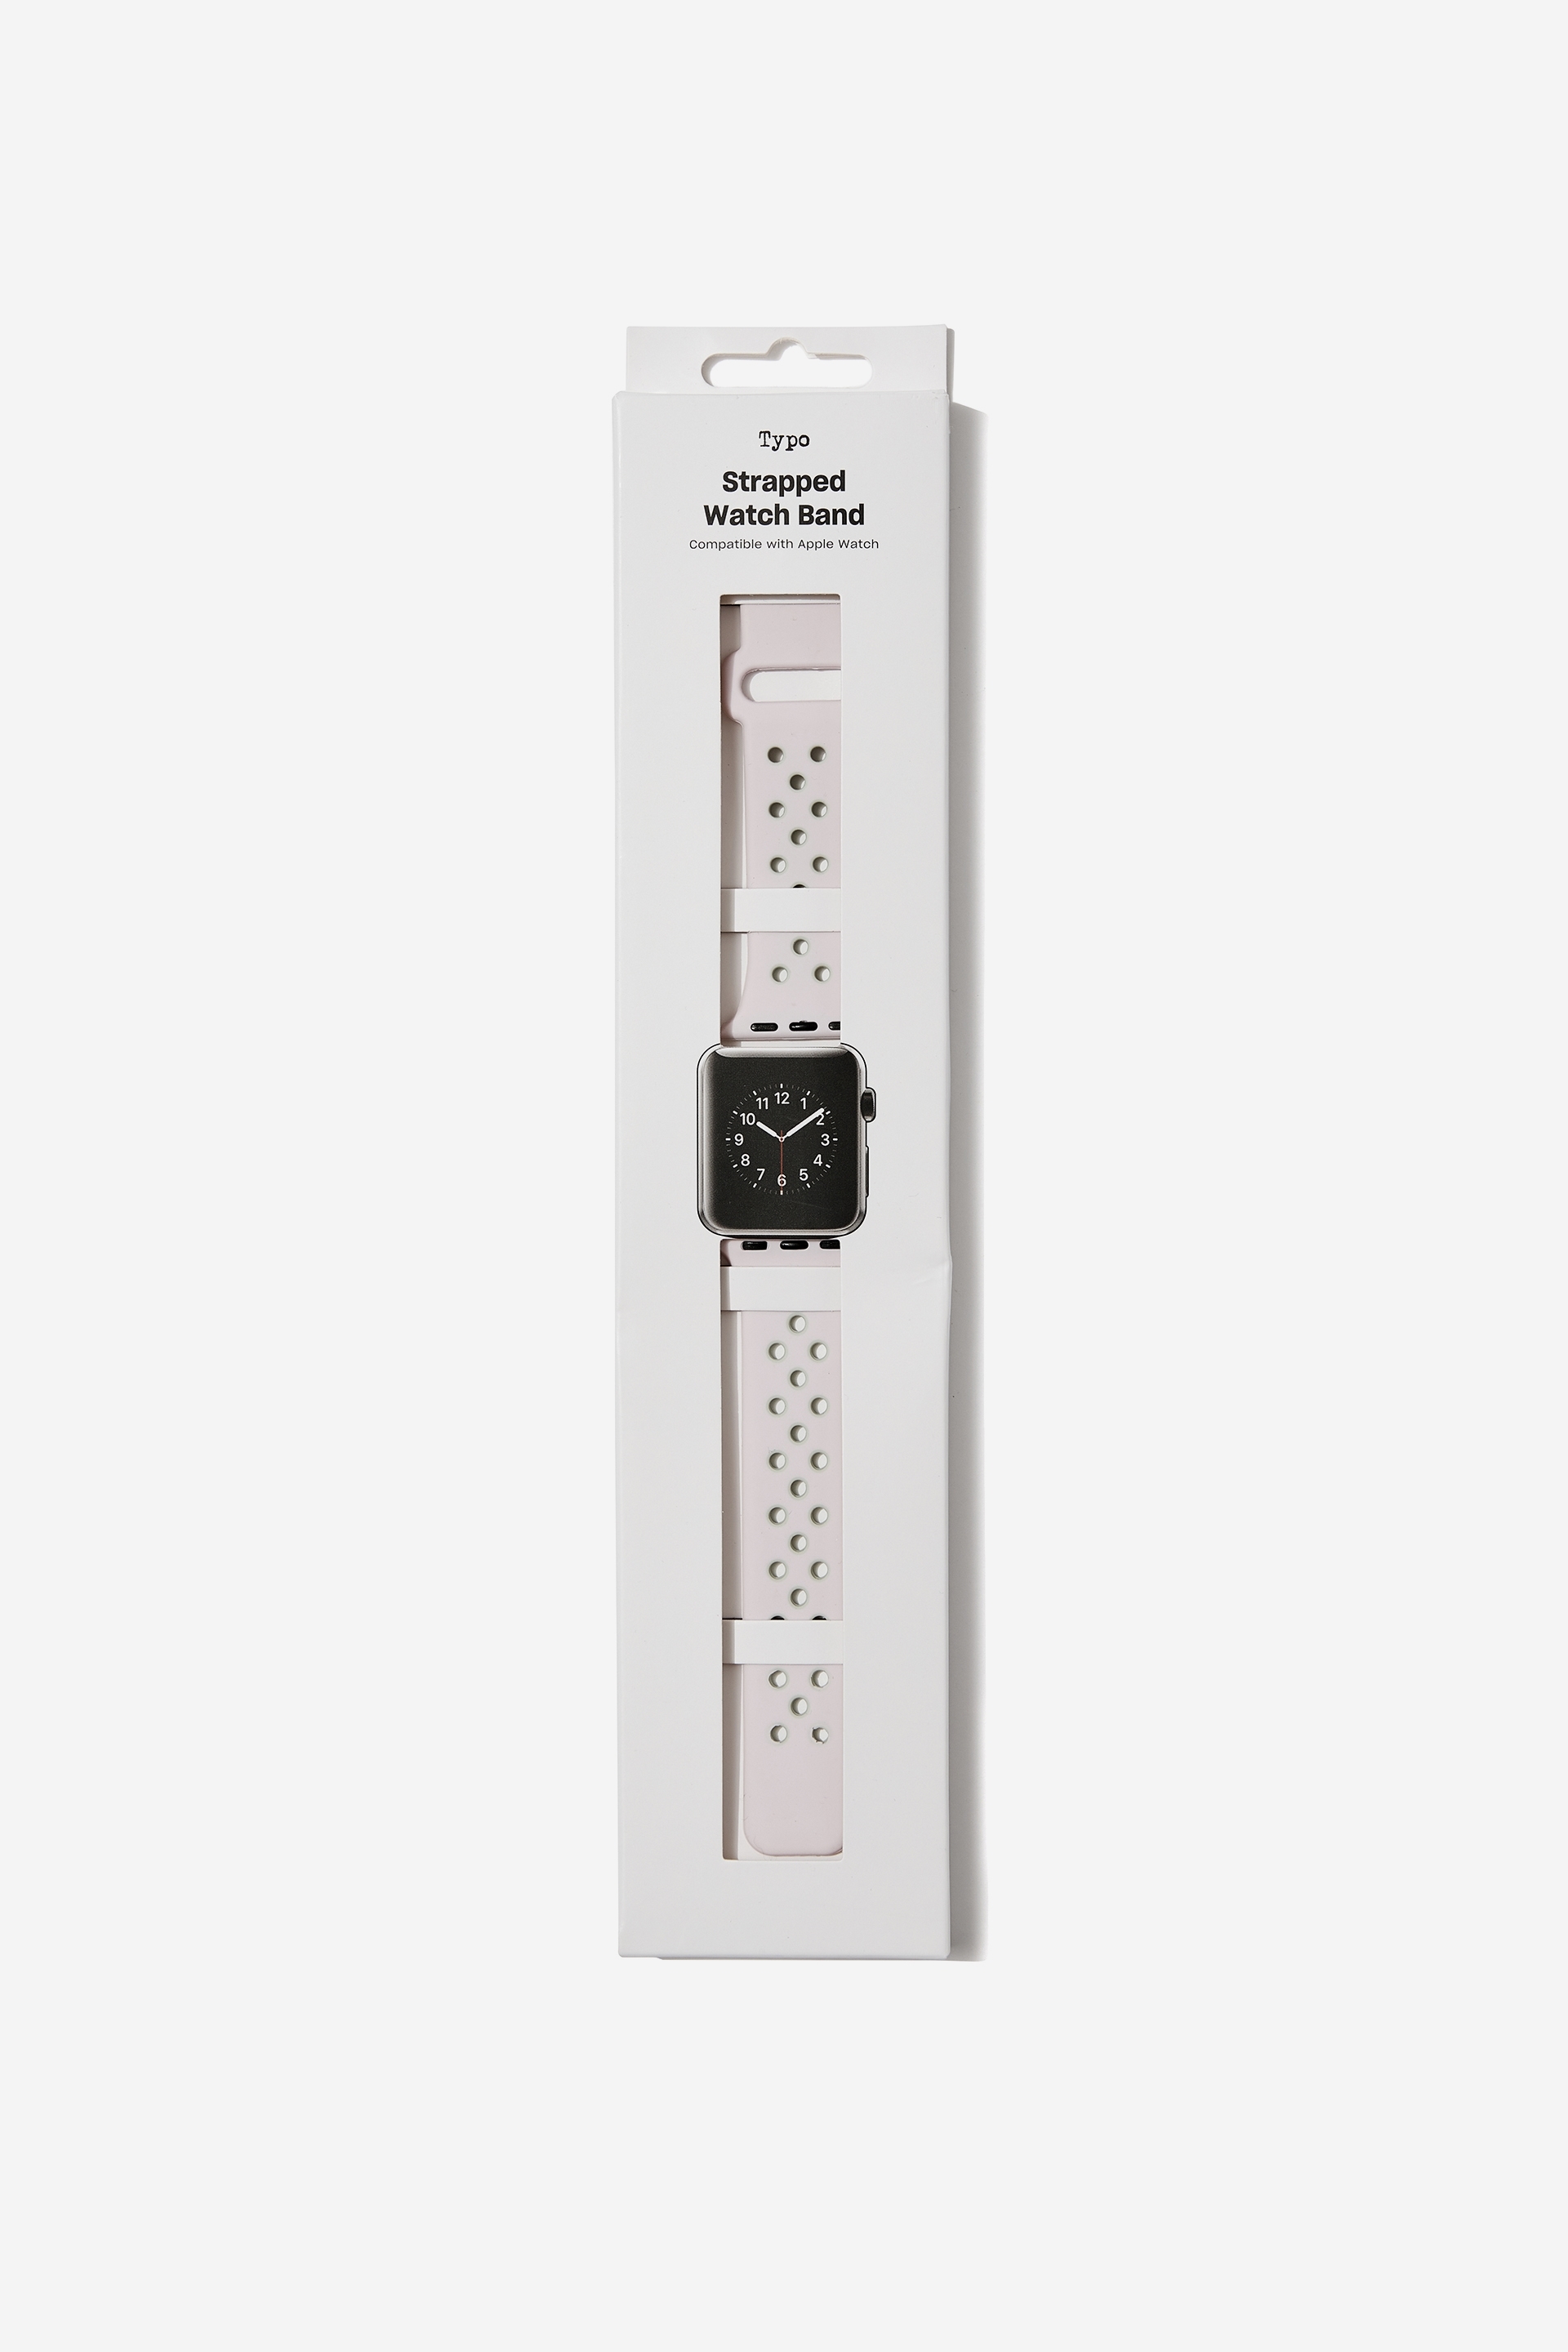 Typo - Strapped Watch Strap - Spring mint and pink salt